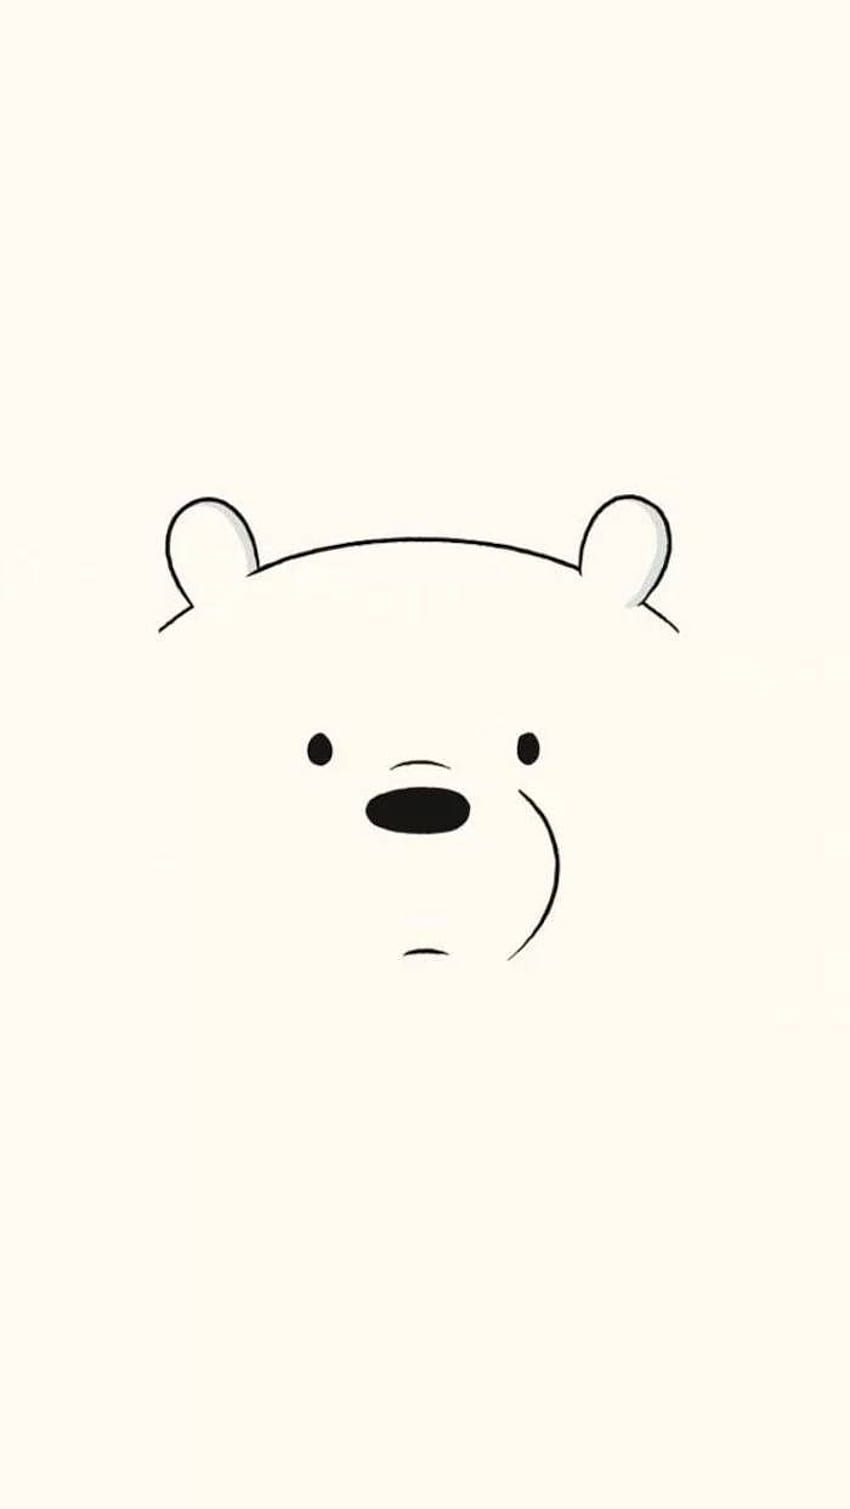 Download We bare bears wallpaper by myssrtkn  5c  Free on ZEDGE now  Browse millions of popular  We bare bears wallpapers Bear wallpaper  Cute panda wallpaper